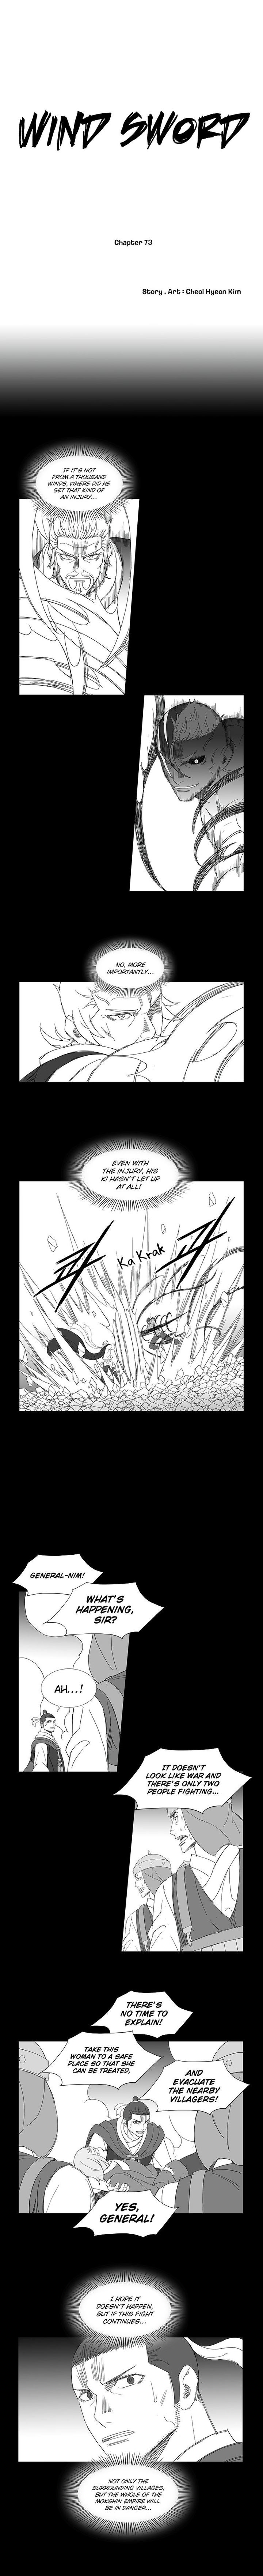 Wind Sword Chapter 73 Page 1